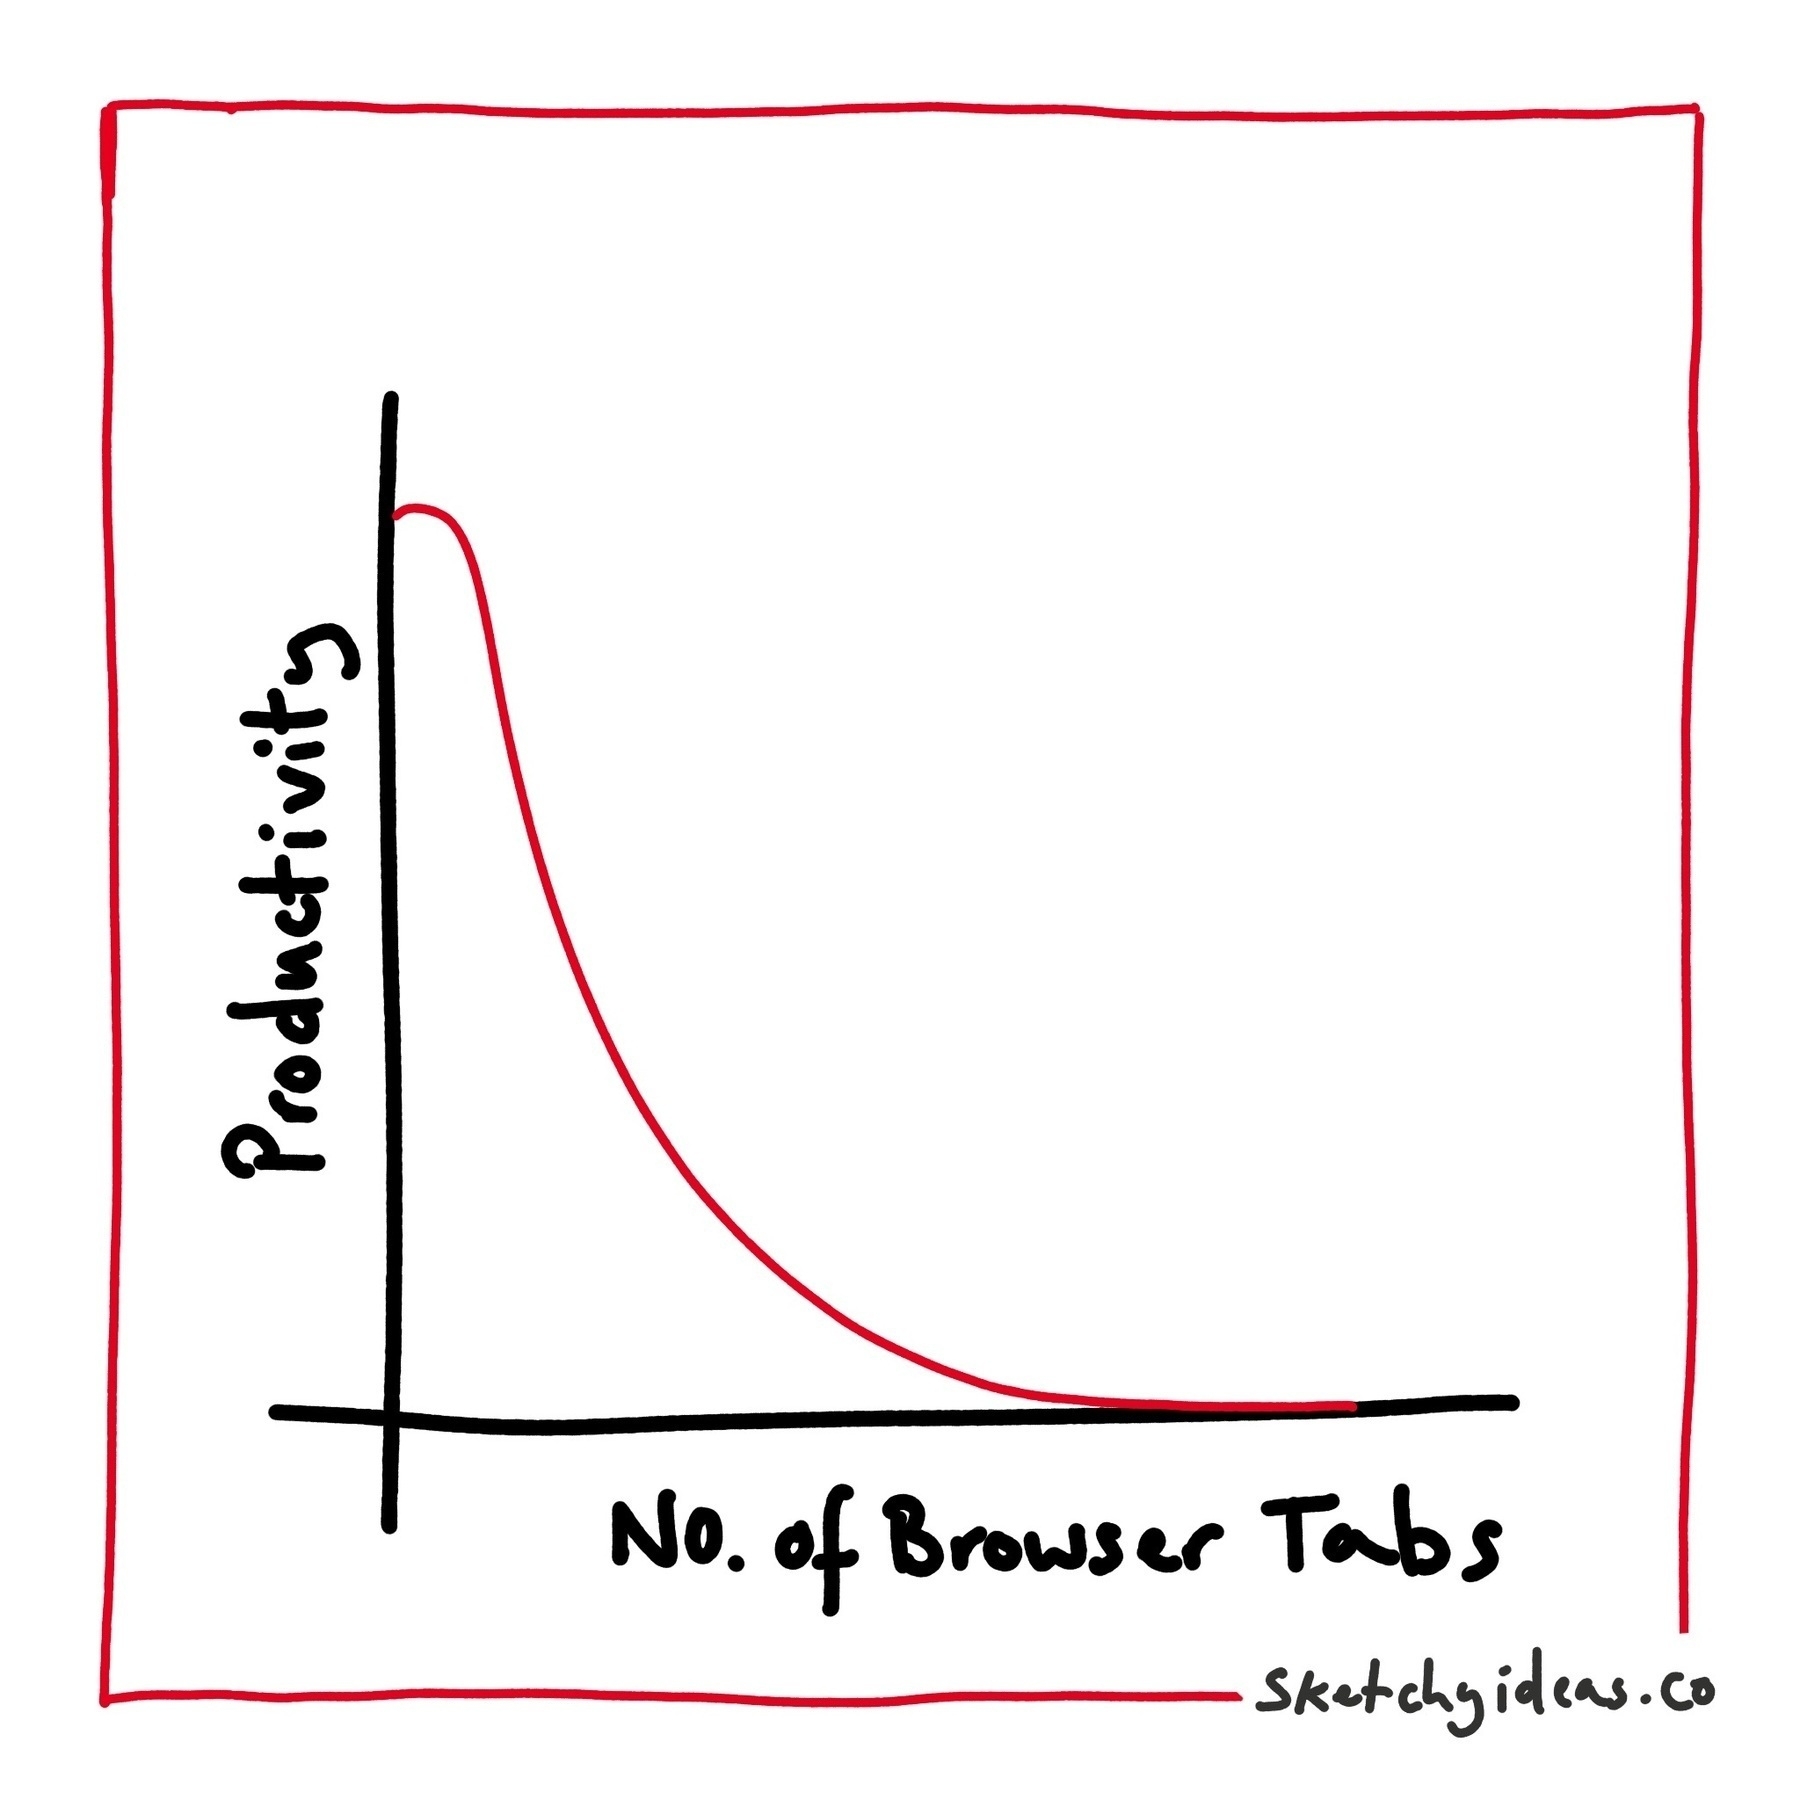 A chart that shows productivity is inversely proportional to the number of browser tabs you have open. 